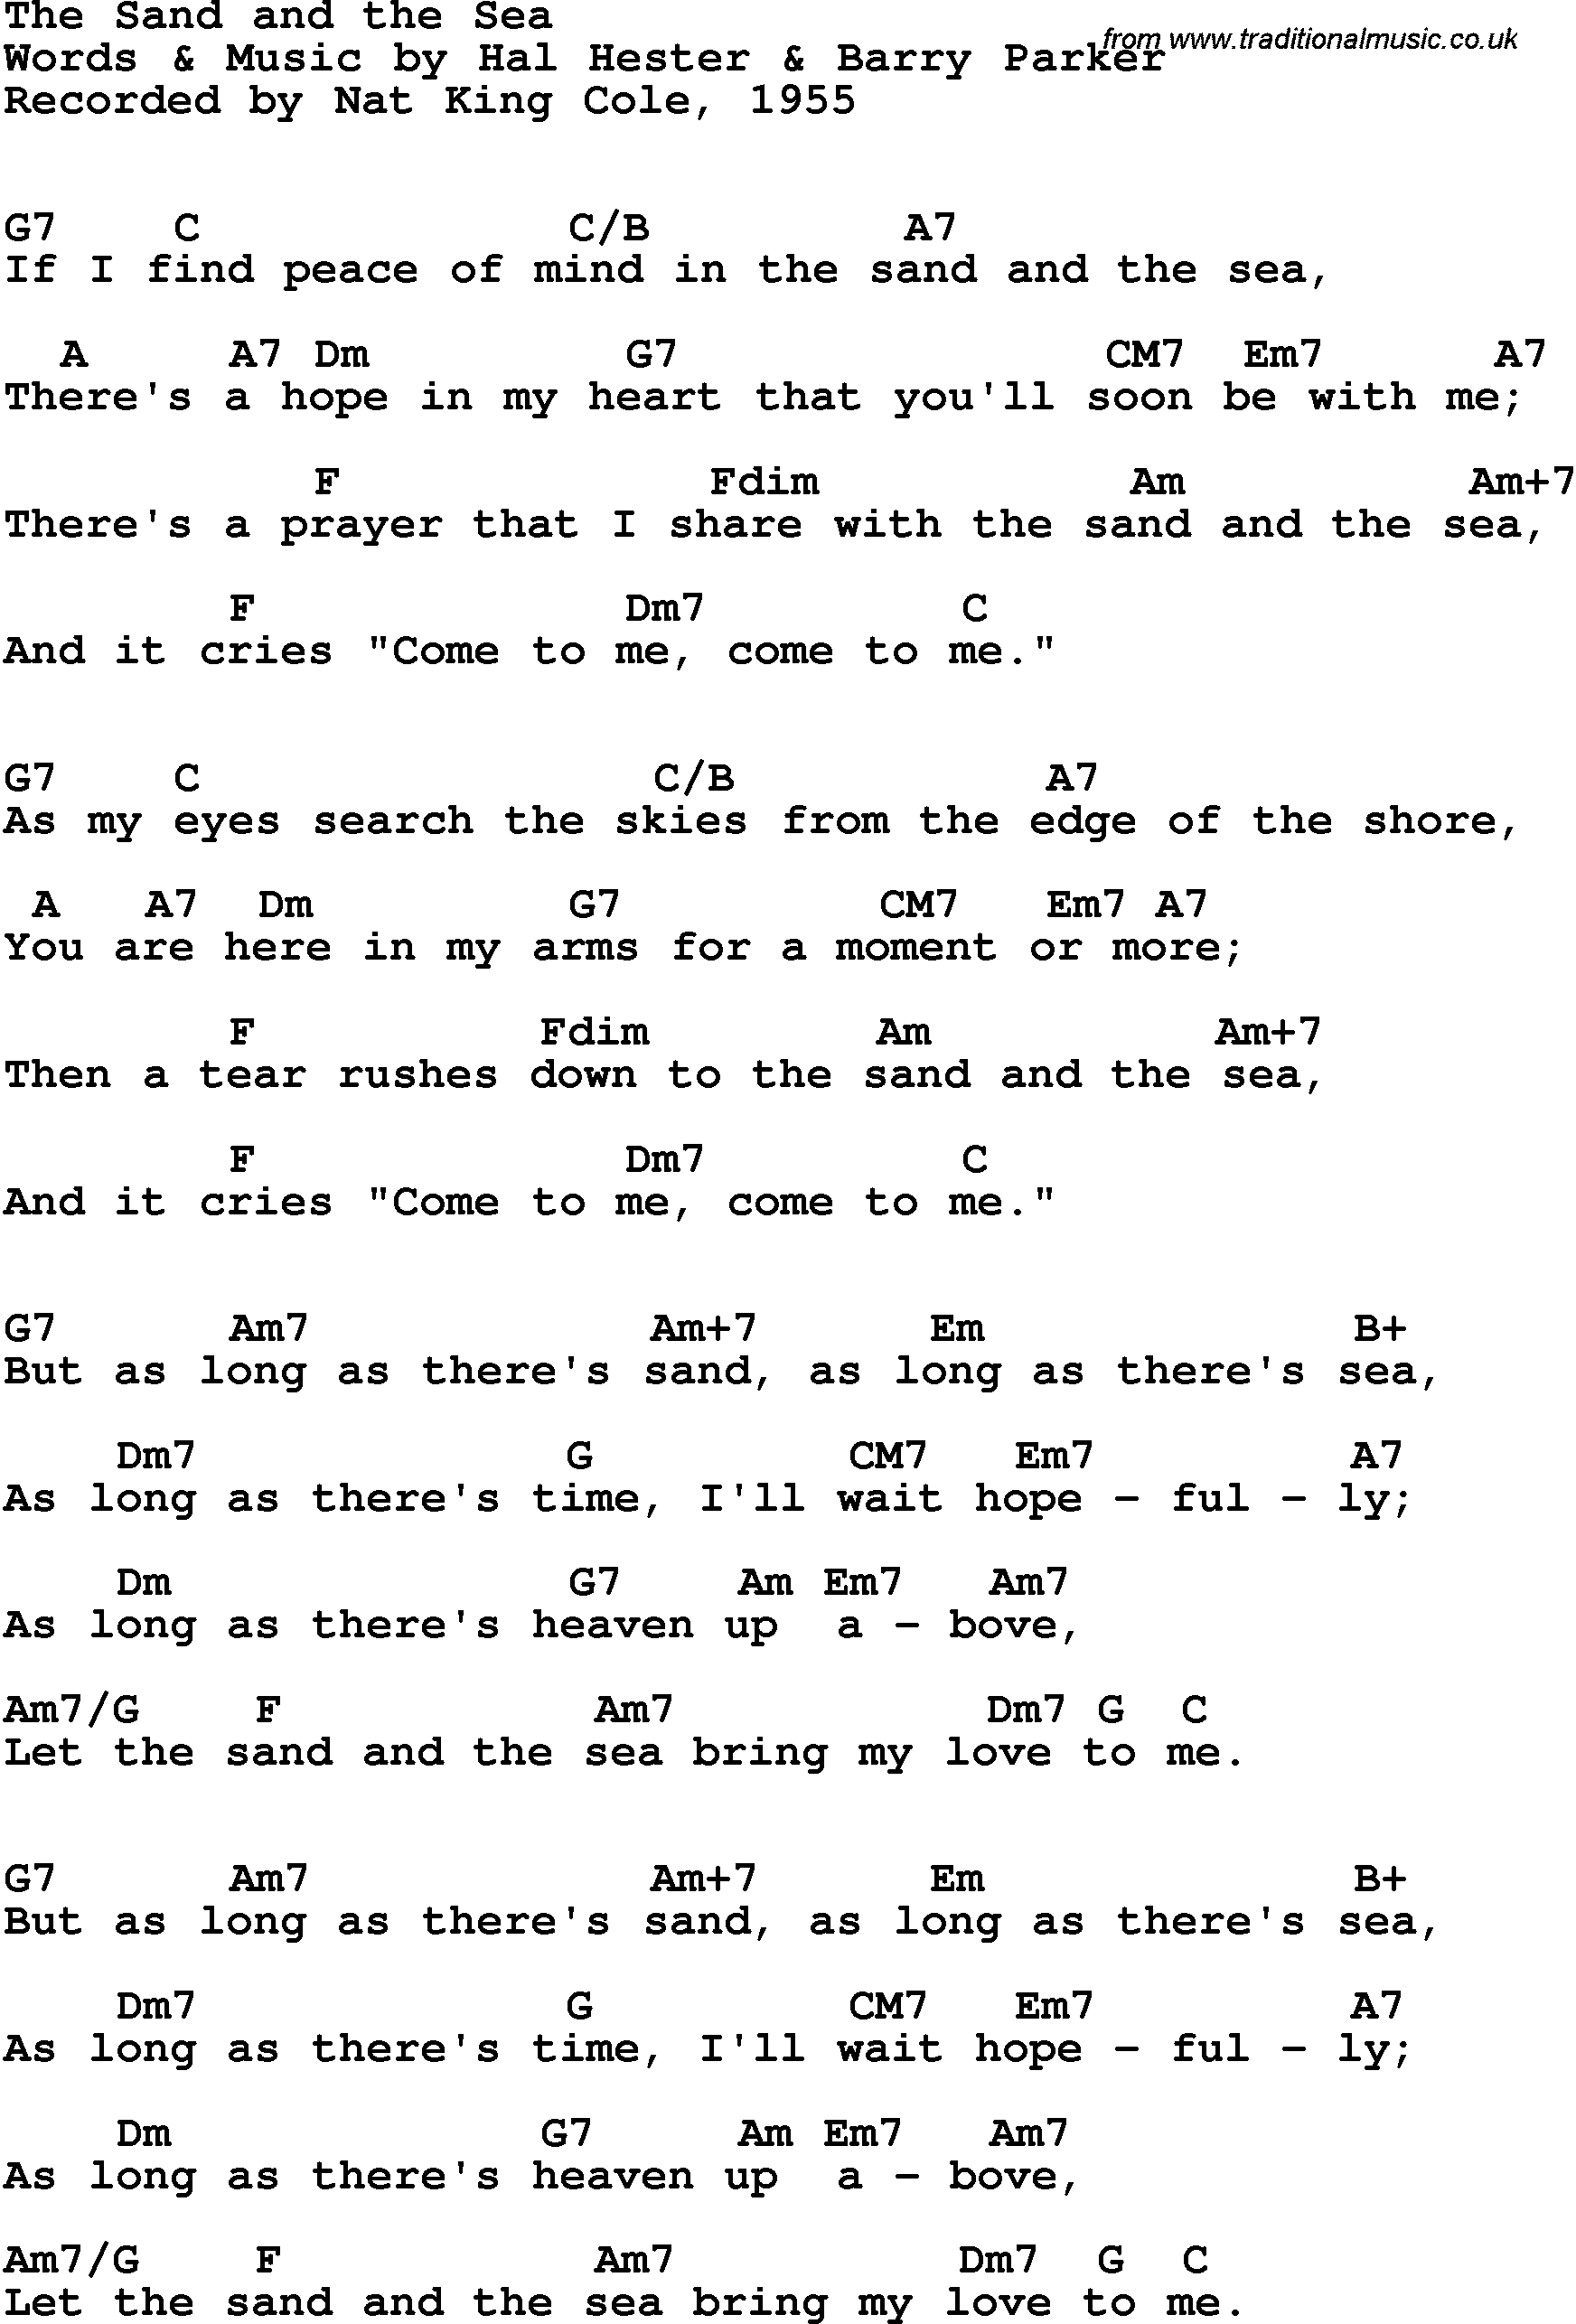 Song Lyrics with guitar chords for Sand And The Sea, The - Nat King Cole, 1955